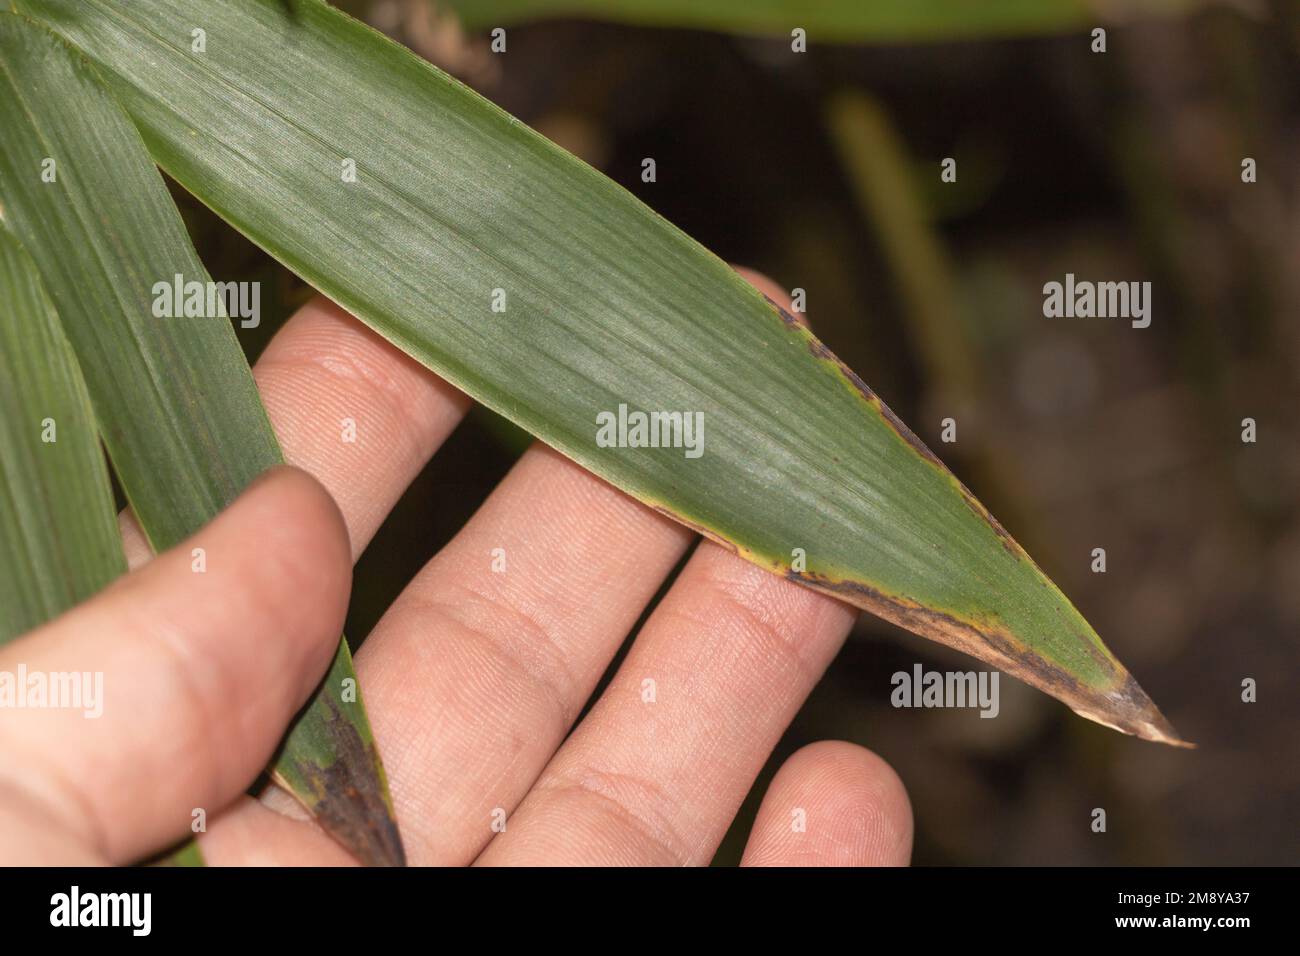 The Sick Leaves of a Bamboo plant in the Gardener's Hand: A Close-Up View Stock Photo